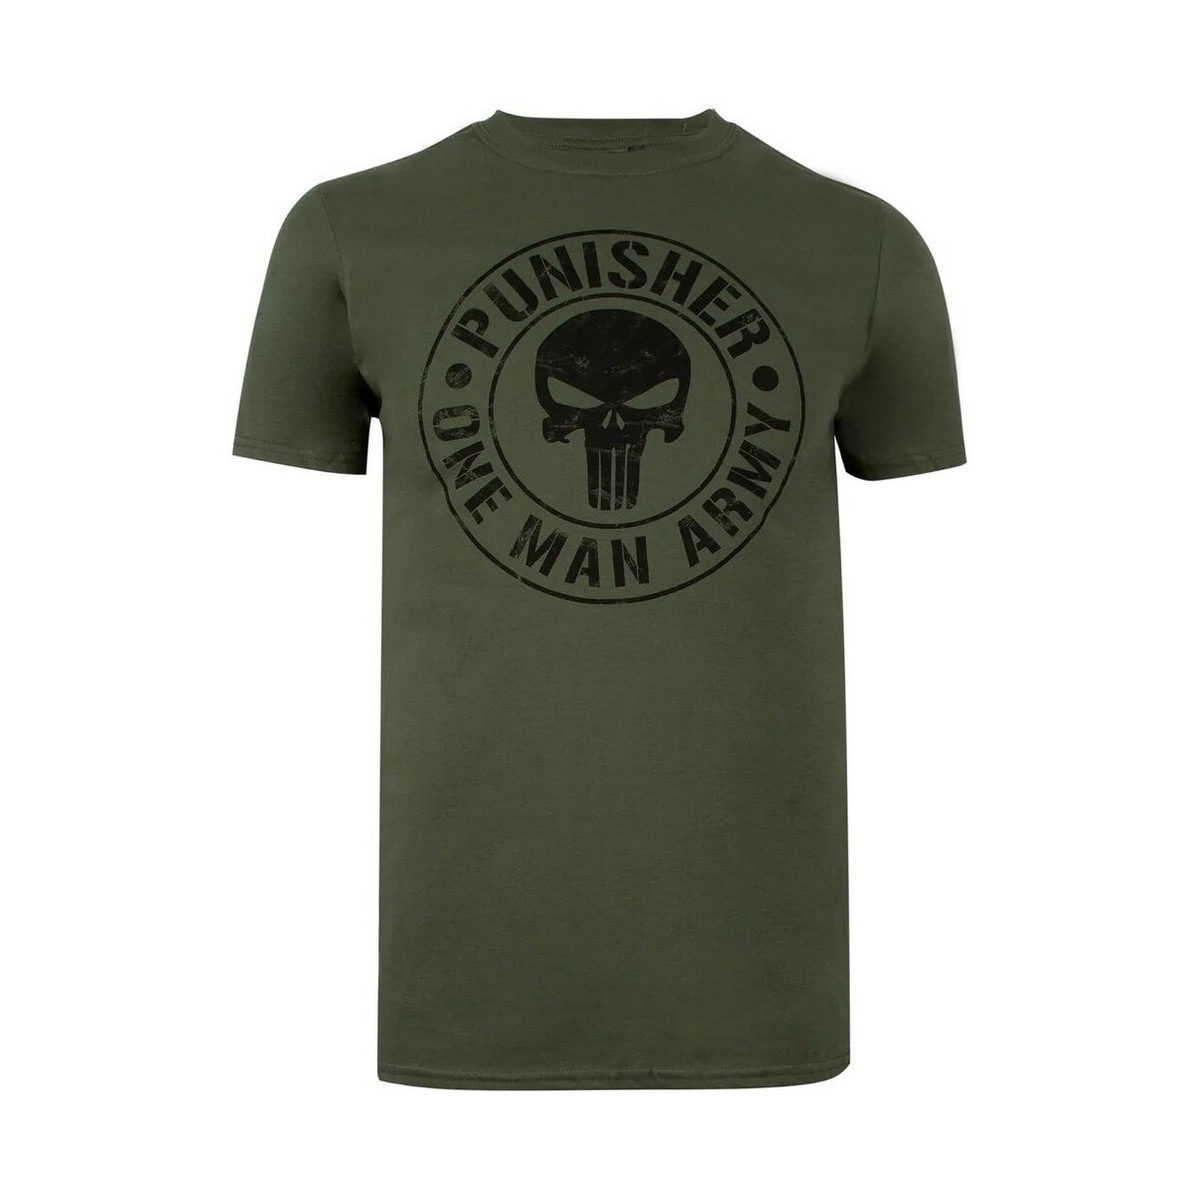 Vêtements Homme T-shirts manches longues The Punisher One Man Army Multicolore